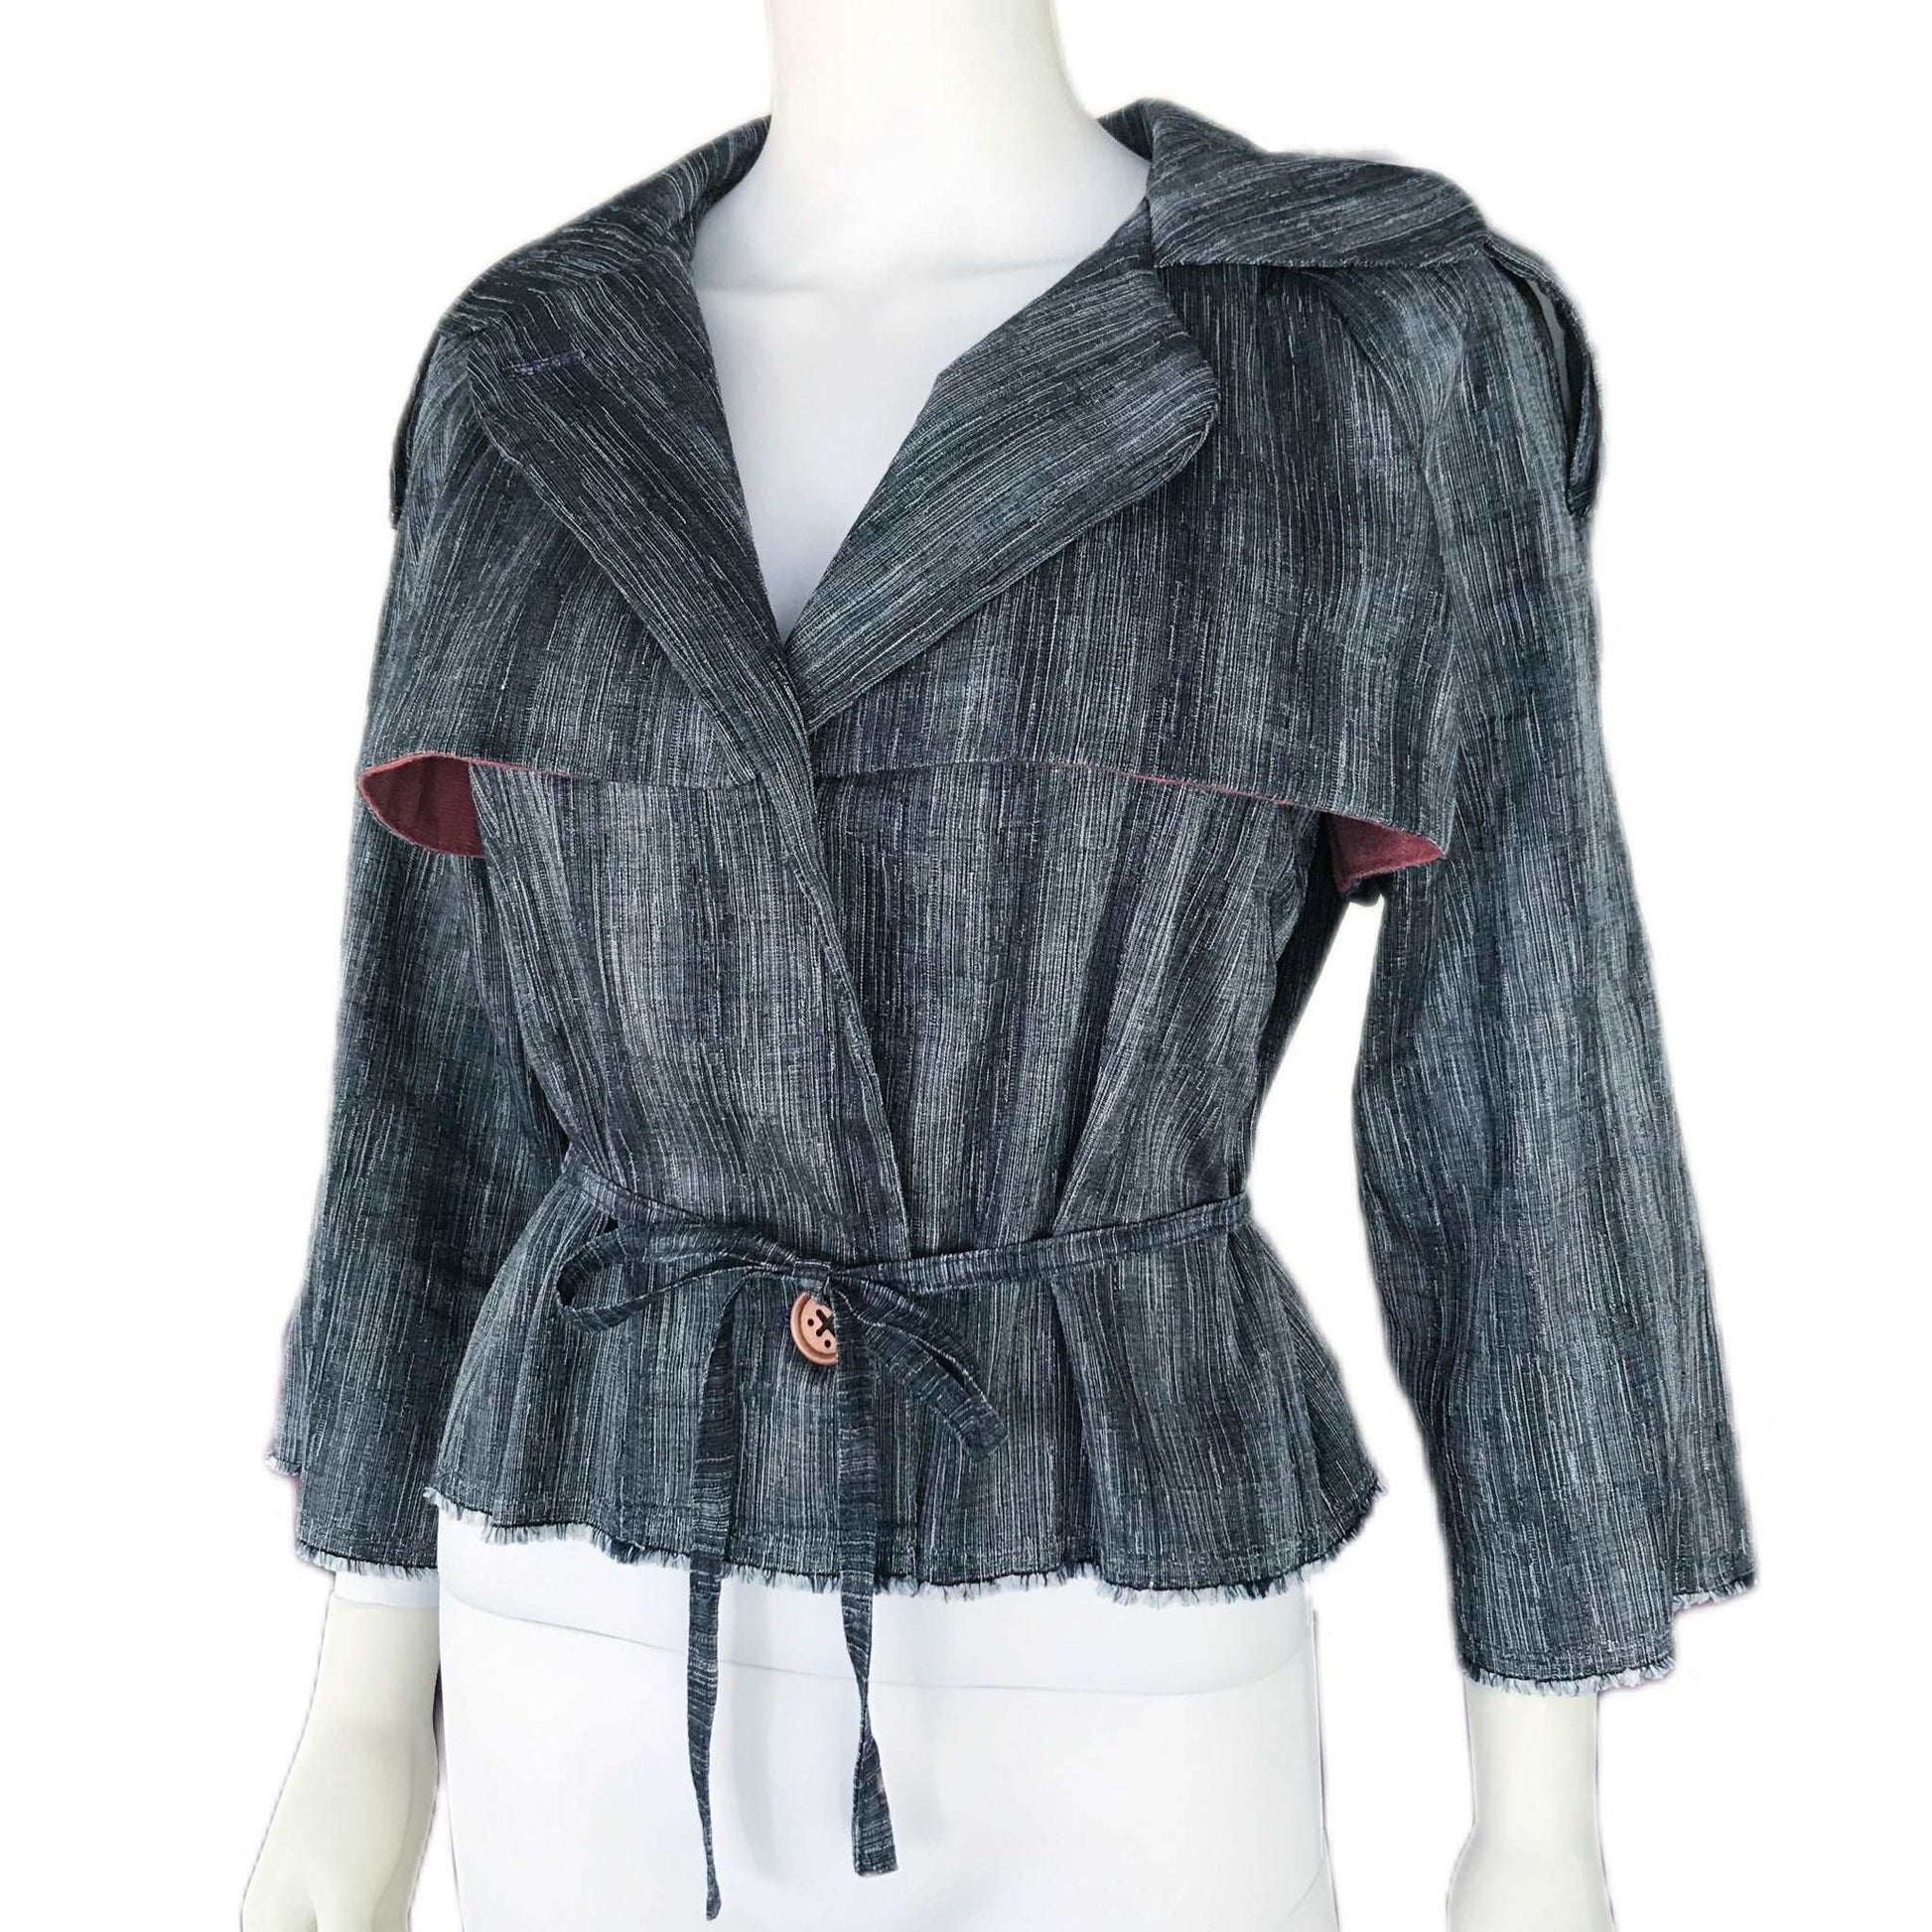 Women's Cropped Denim Trench Jacket- Size Sm/Med